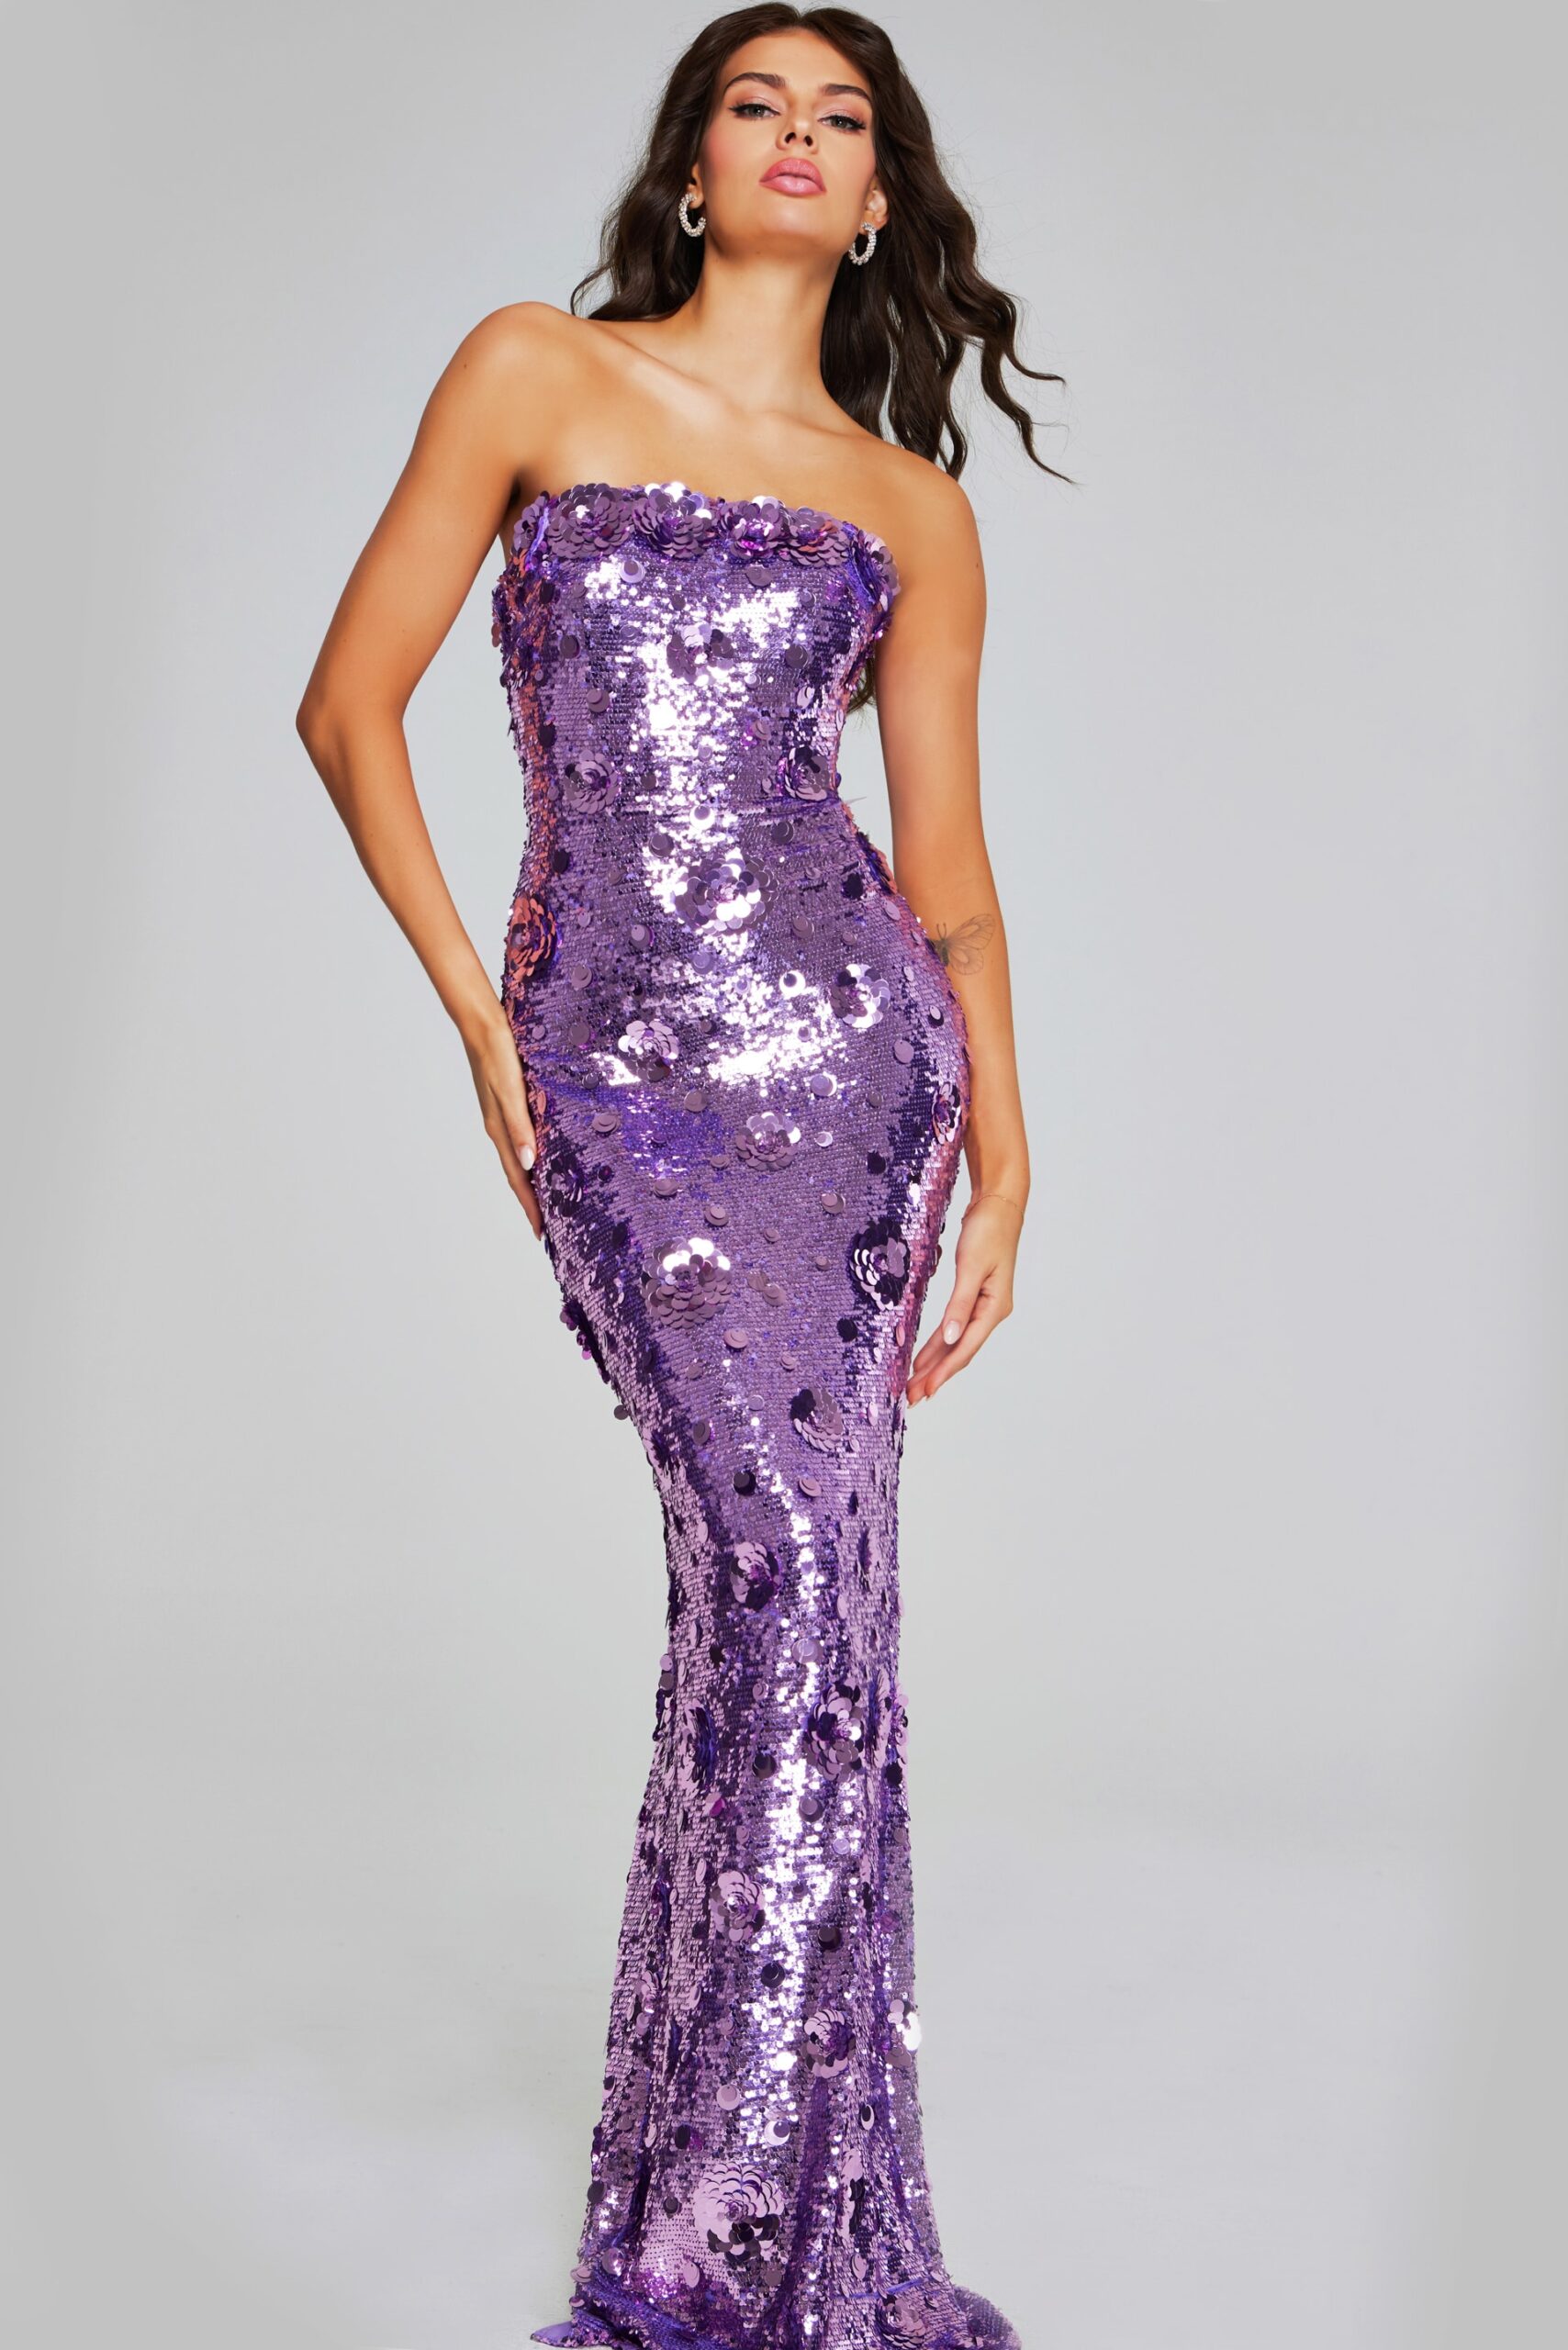 Dazzling Lilac Sequin Strapless Gown with Floral Accents 42154